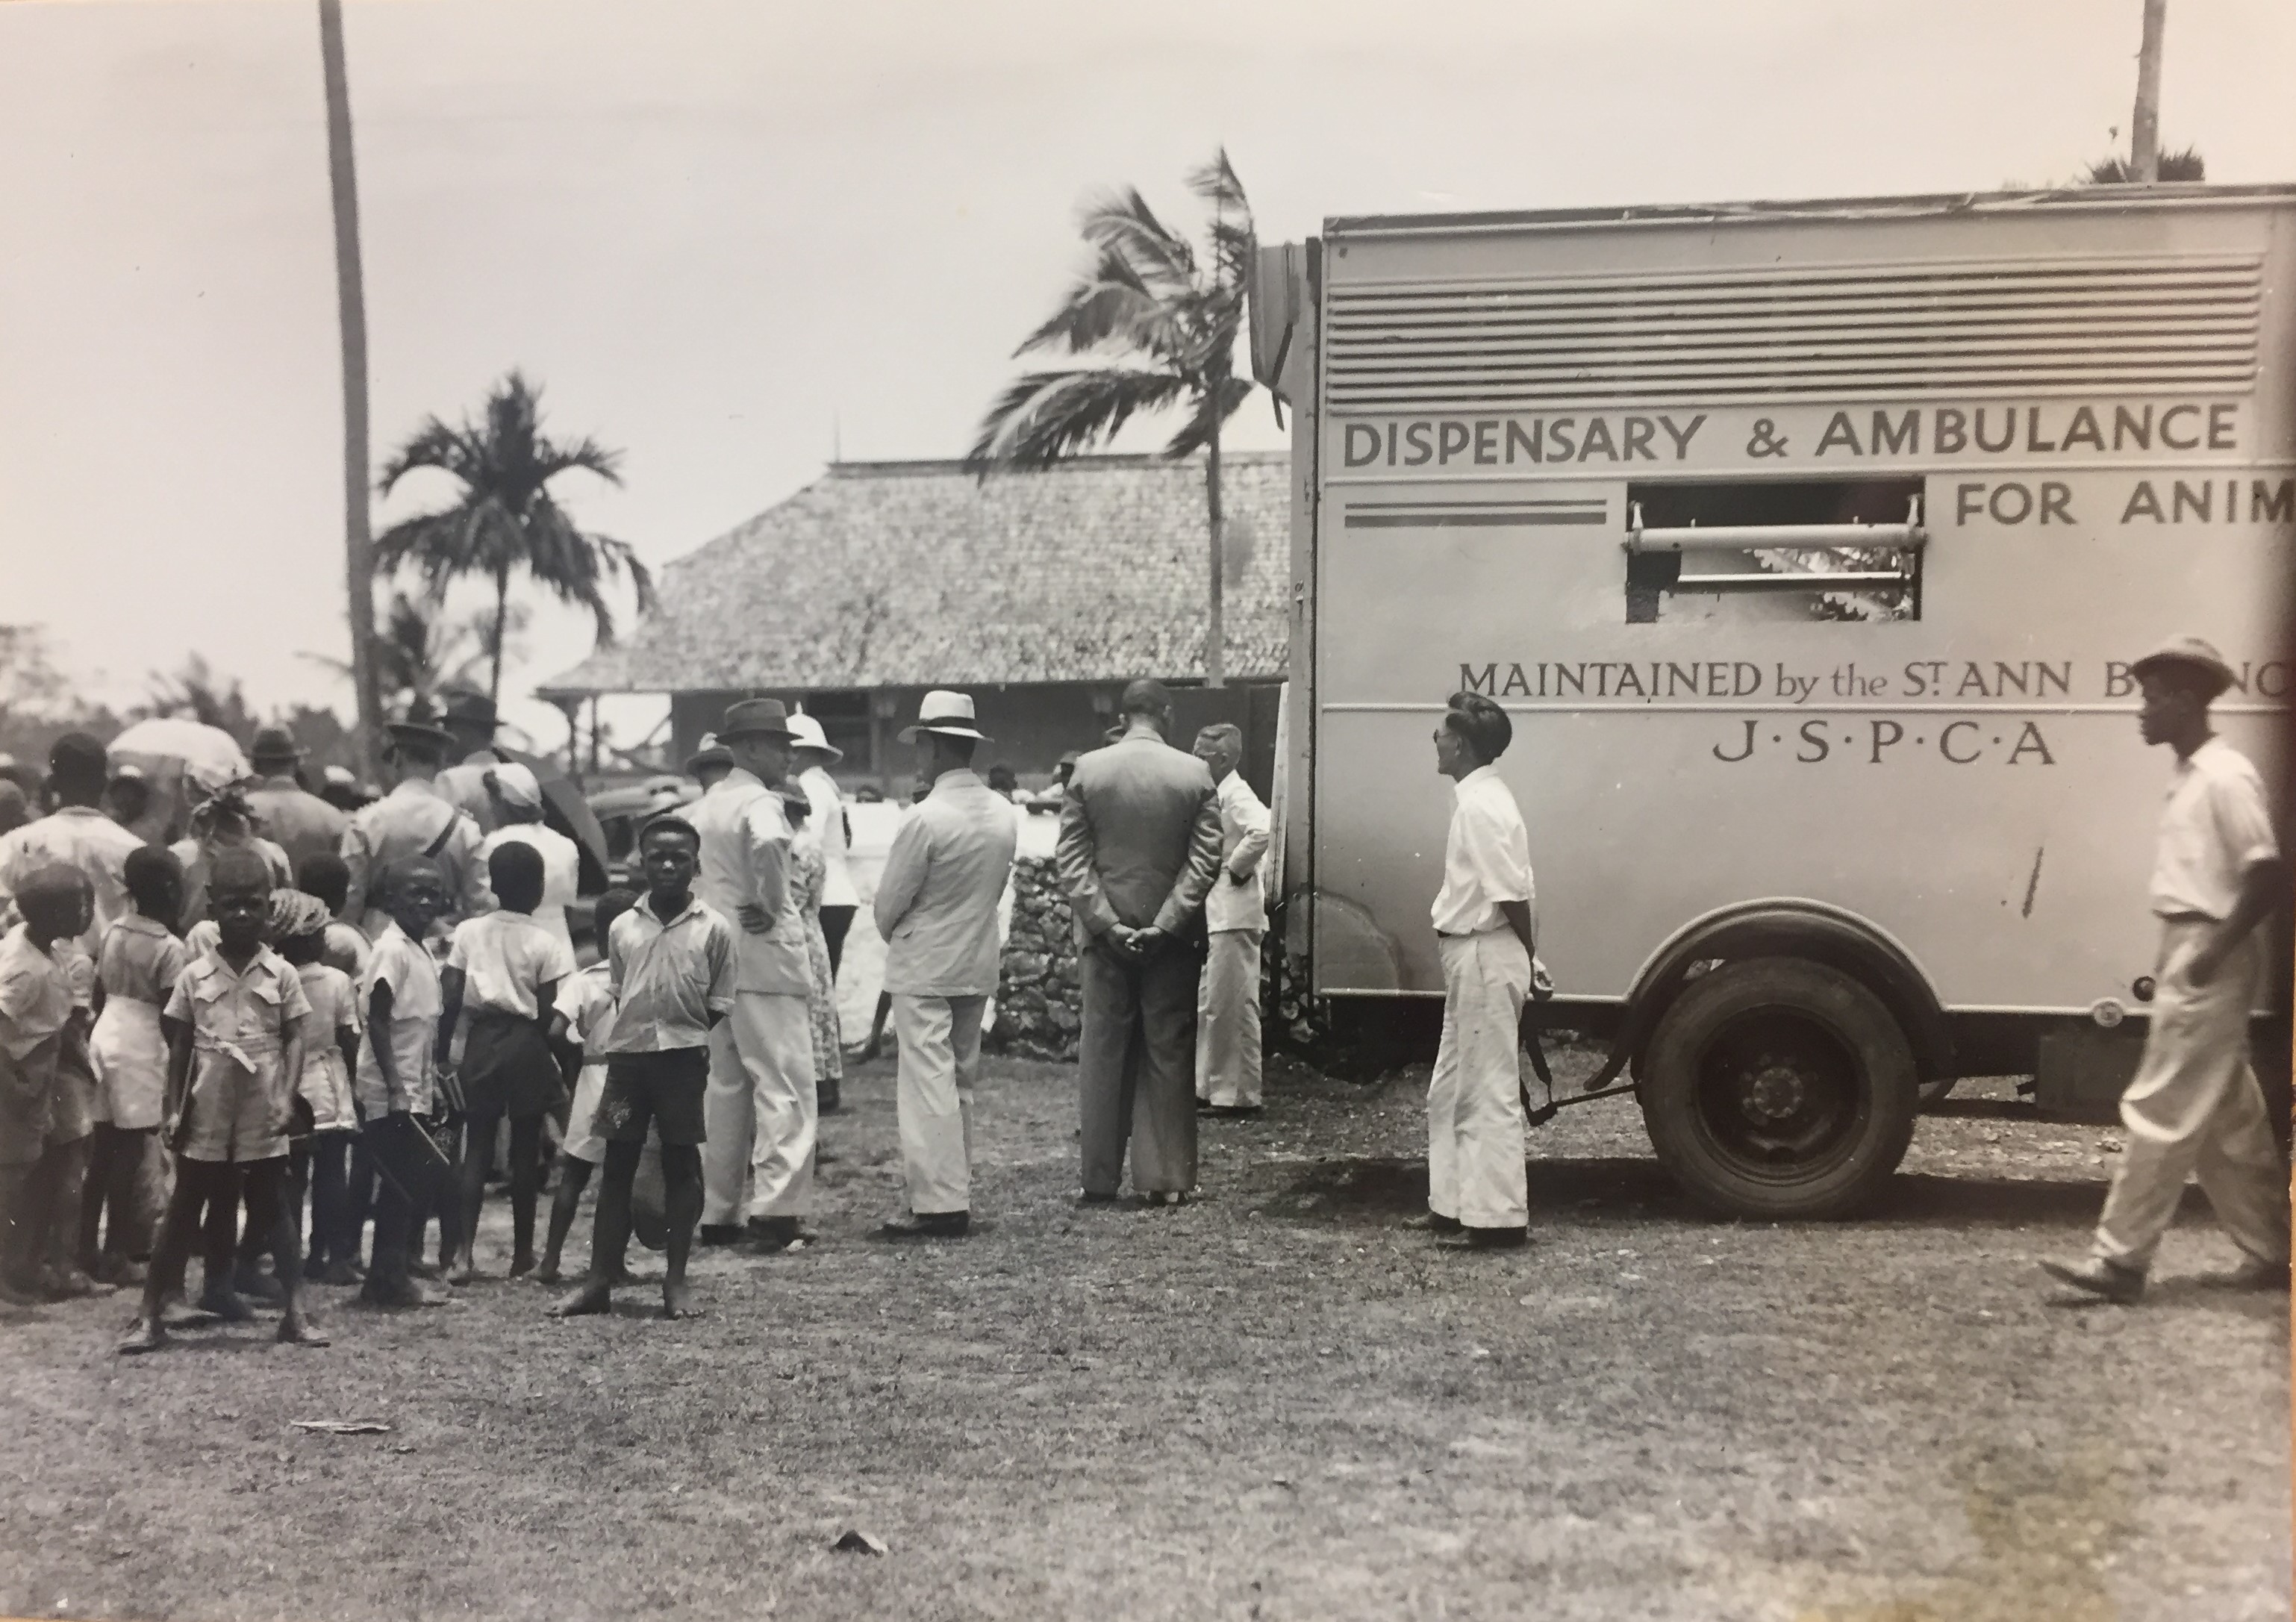 Photograph of Dispensary & Ambulance for Animals